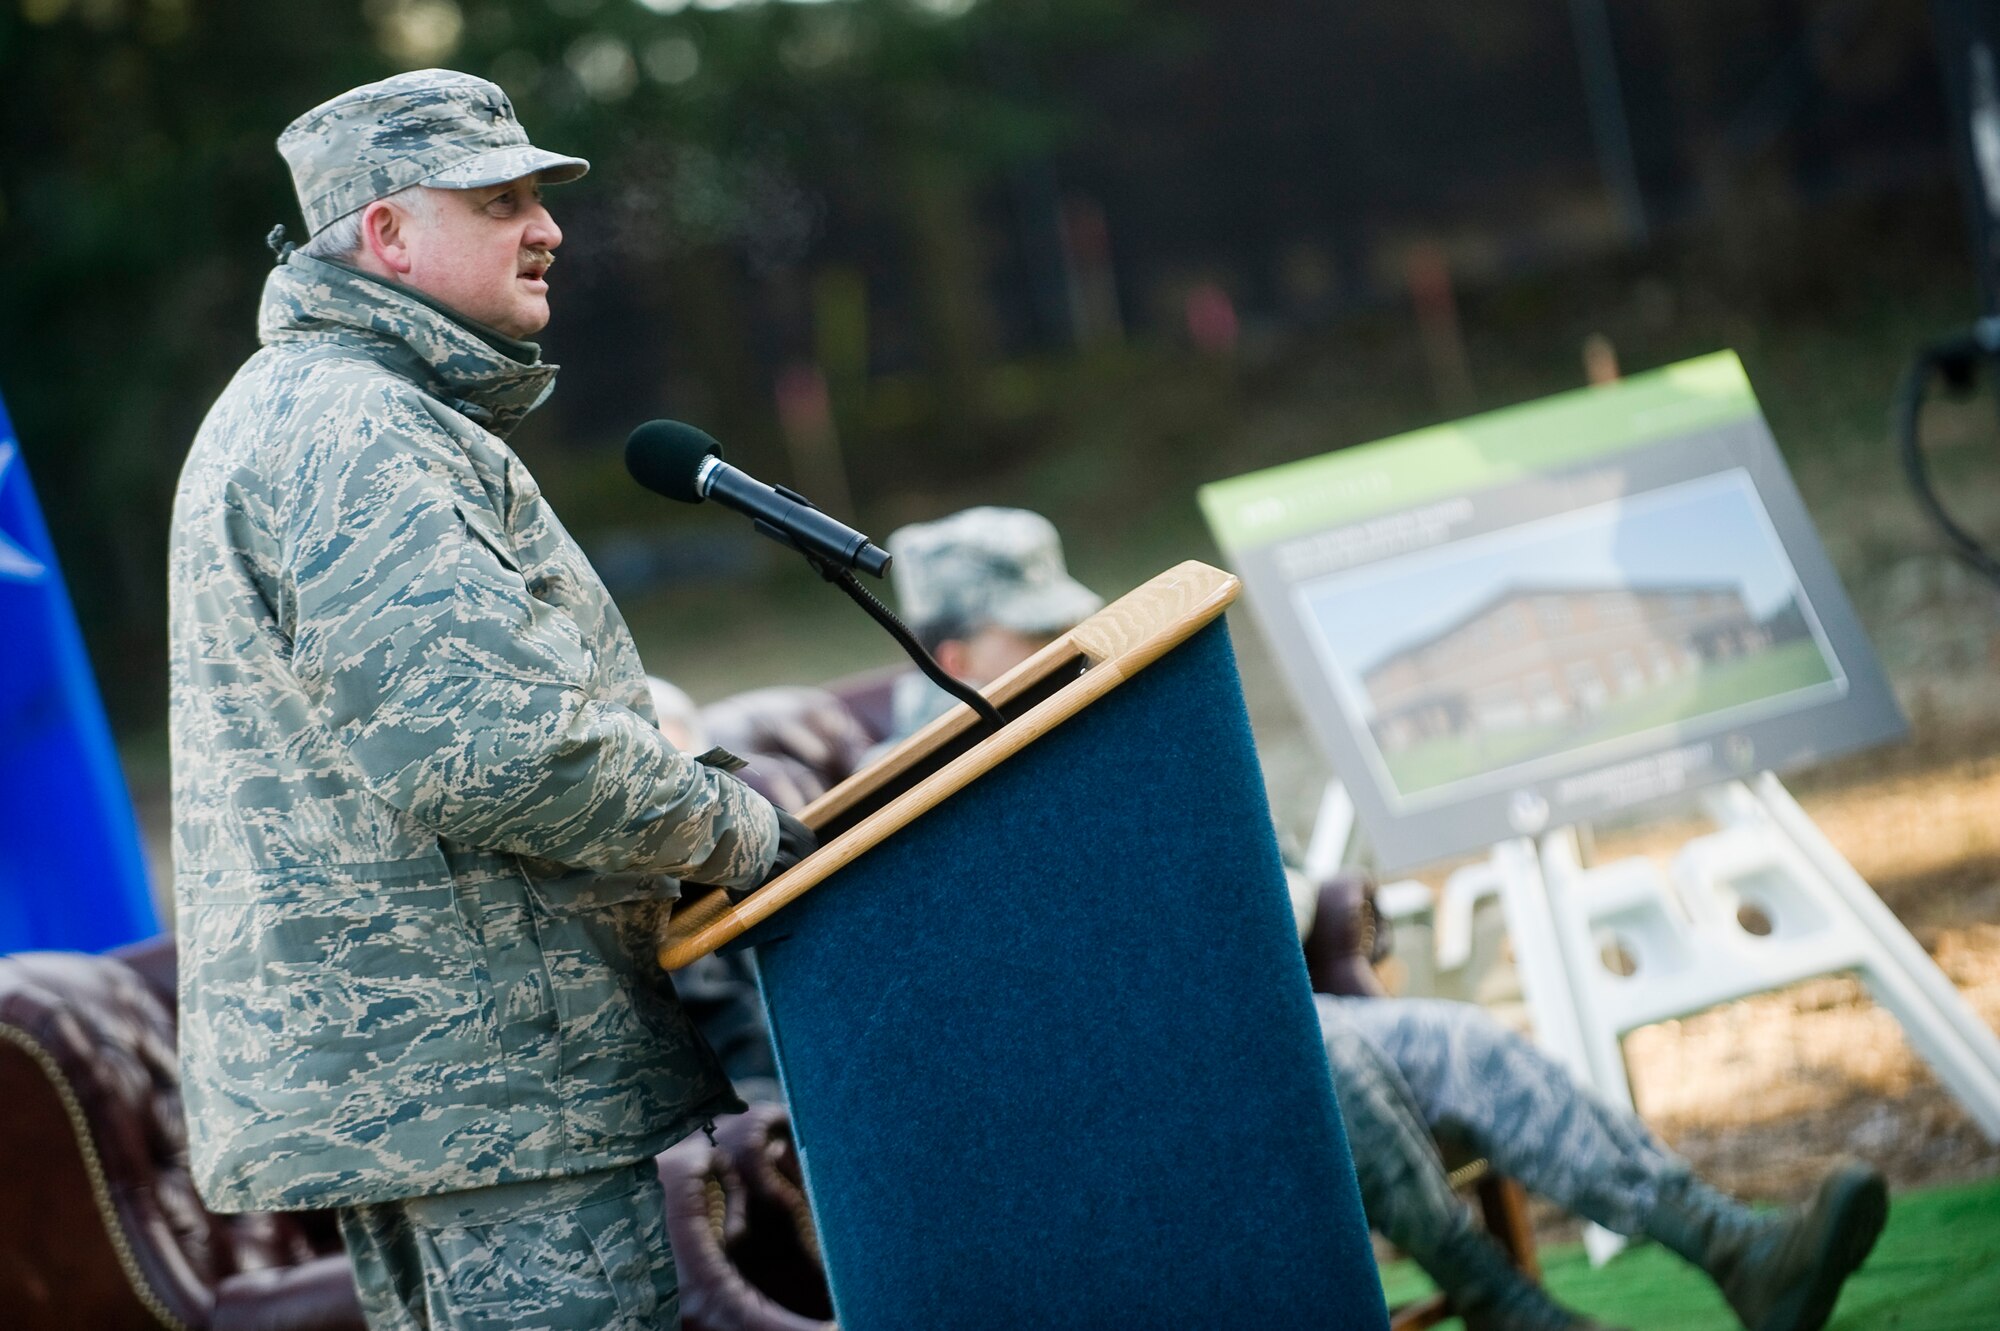 Maj. Gen. Timothy Lowenberg, adjutant general and commander of the Washington National Guard, speaks during a ground breaking ceremony for a new 23,500-square foot facility for the 262nd Network Warfare Squadron Dec. 11. The $5.6 million construction project is scheduled for completion in October 2010. The mission of the 262nd NWS is to train citizen Airmen to provide network warfare capabilities to secure defense information networks and provide full-spectrum cyberspace options to the State of Washington, Air Force Space Command and 24th Air Force. The 262nd NWS is part of the 688th Information Operations Wing at Lackland Air Force Base, Texas.(U.S. Air Force photo/Abner Guzman) 